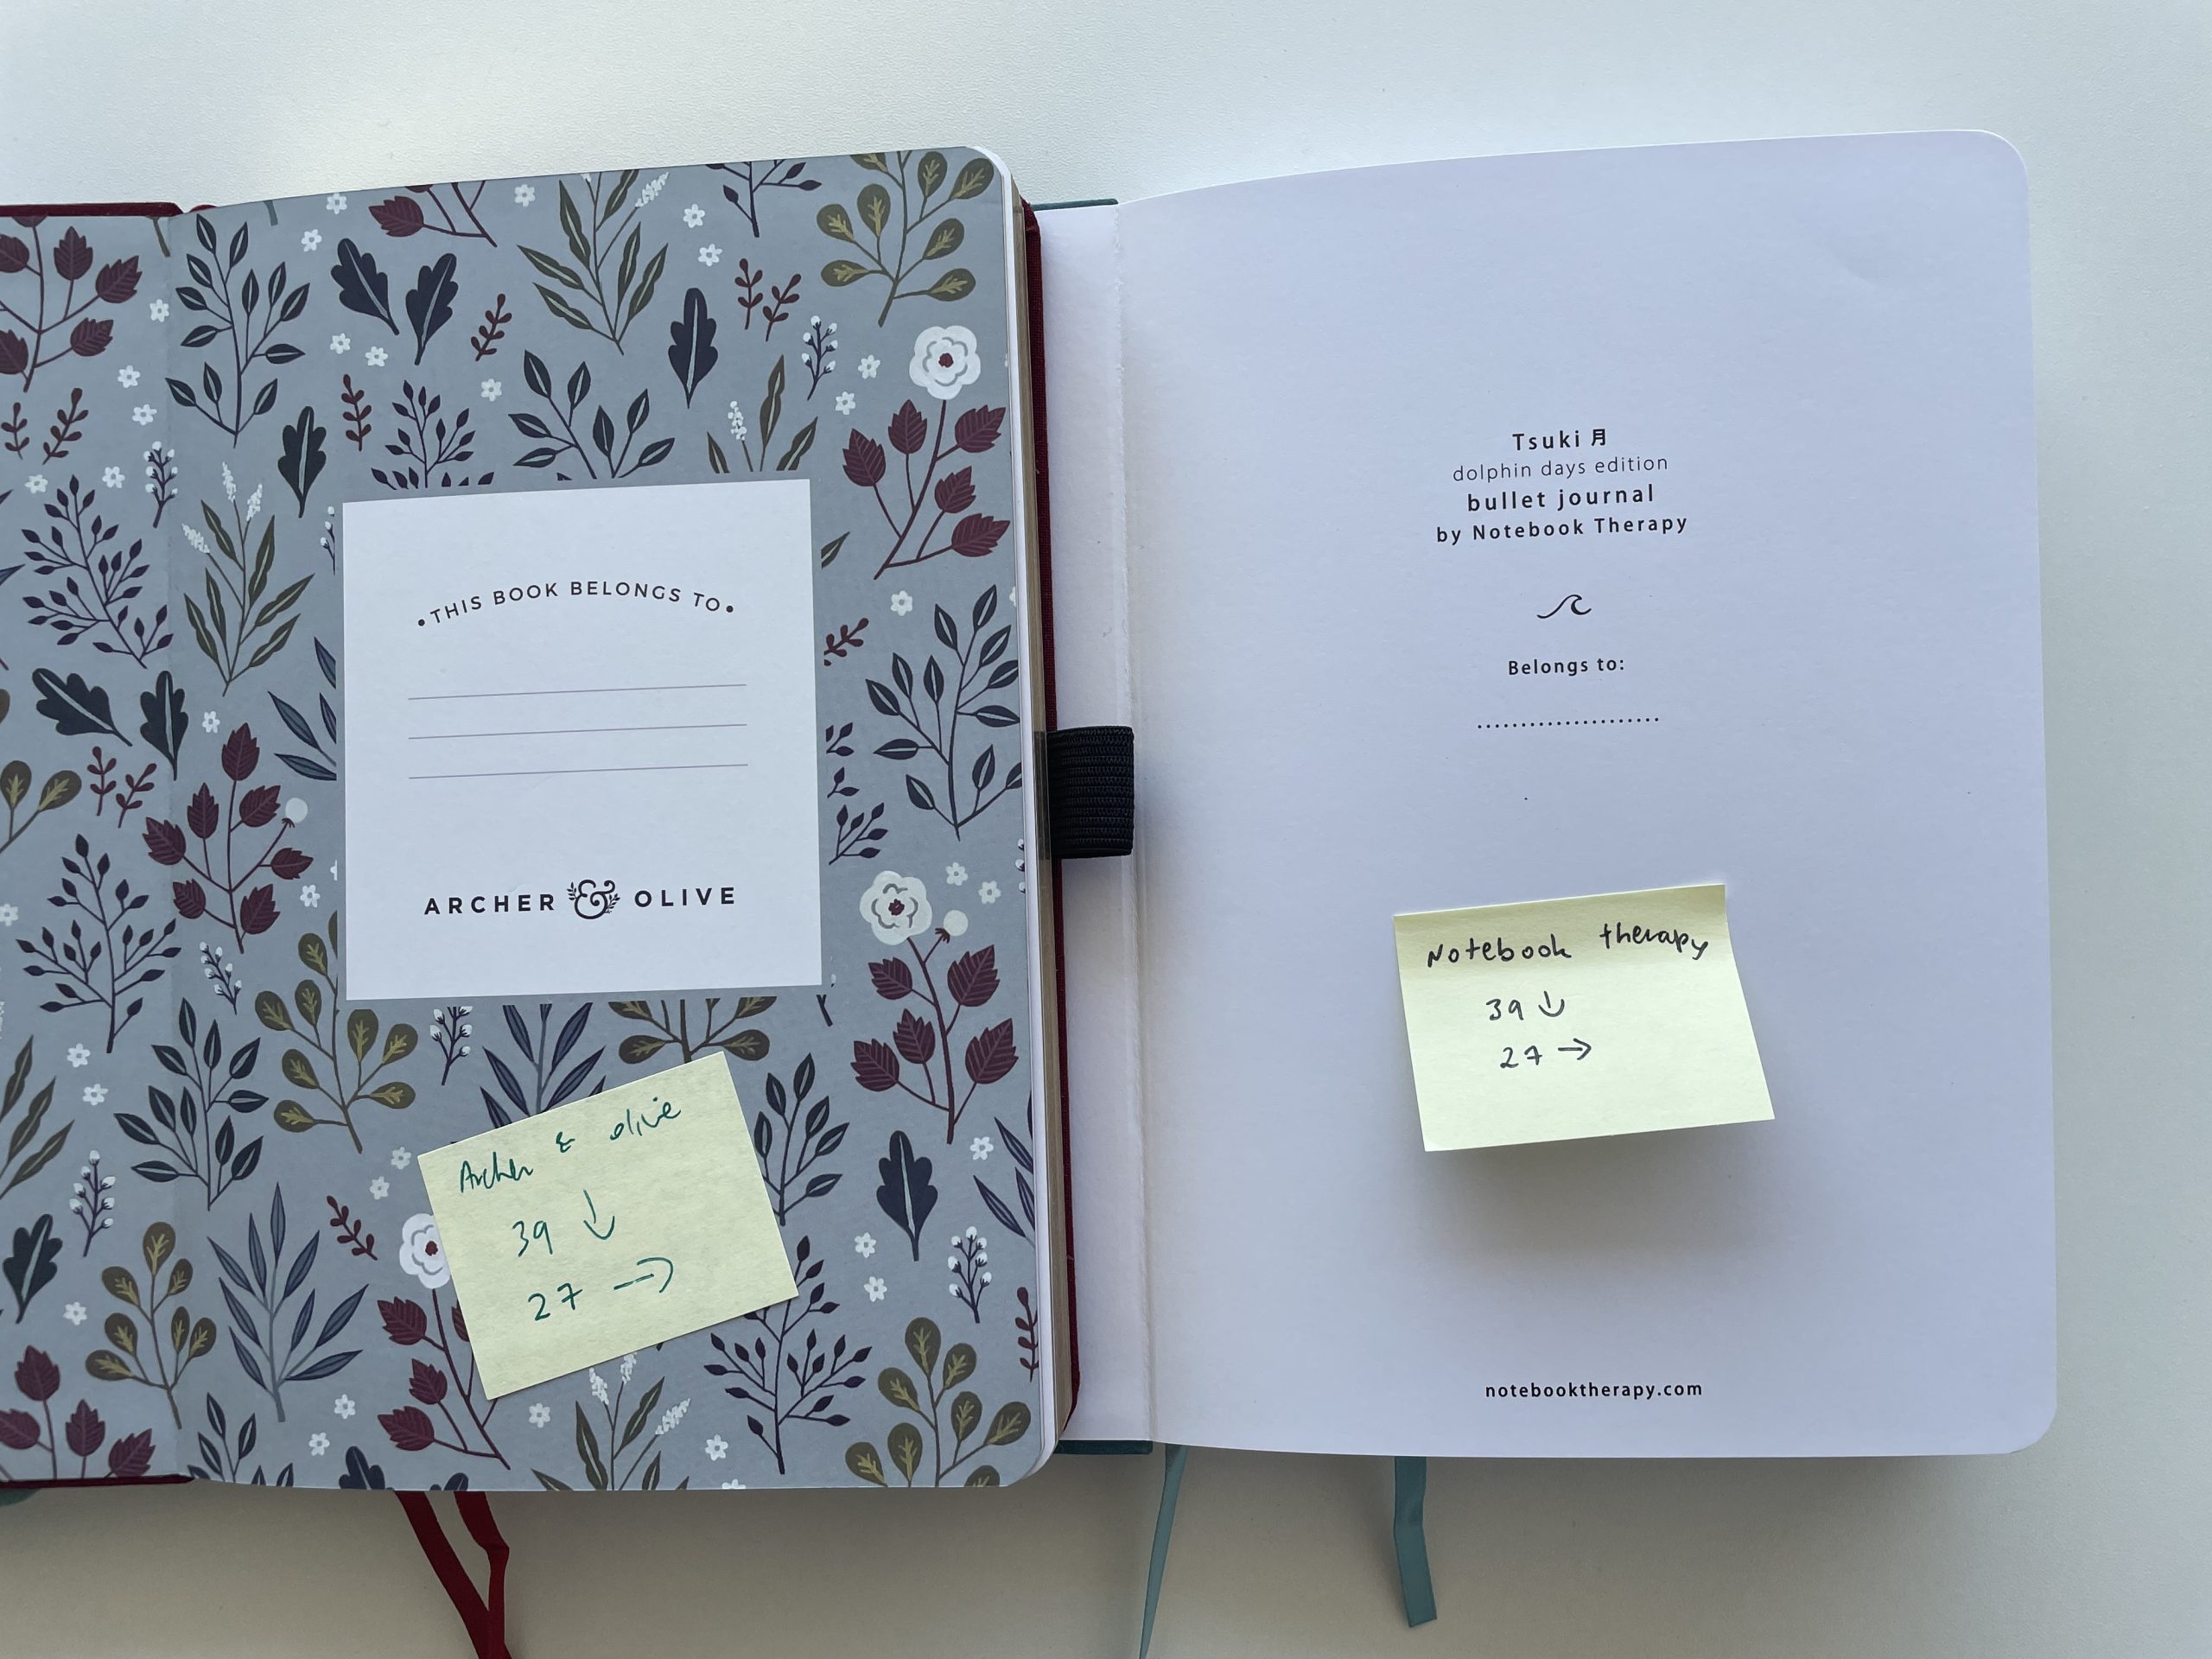 archer and olive versus notebook therapy which dot grid journal is better pros and cons